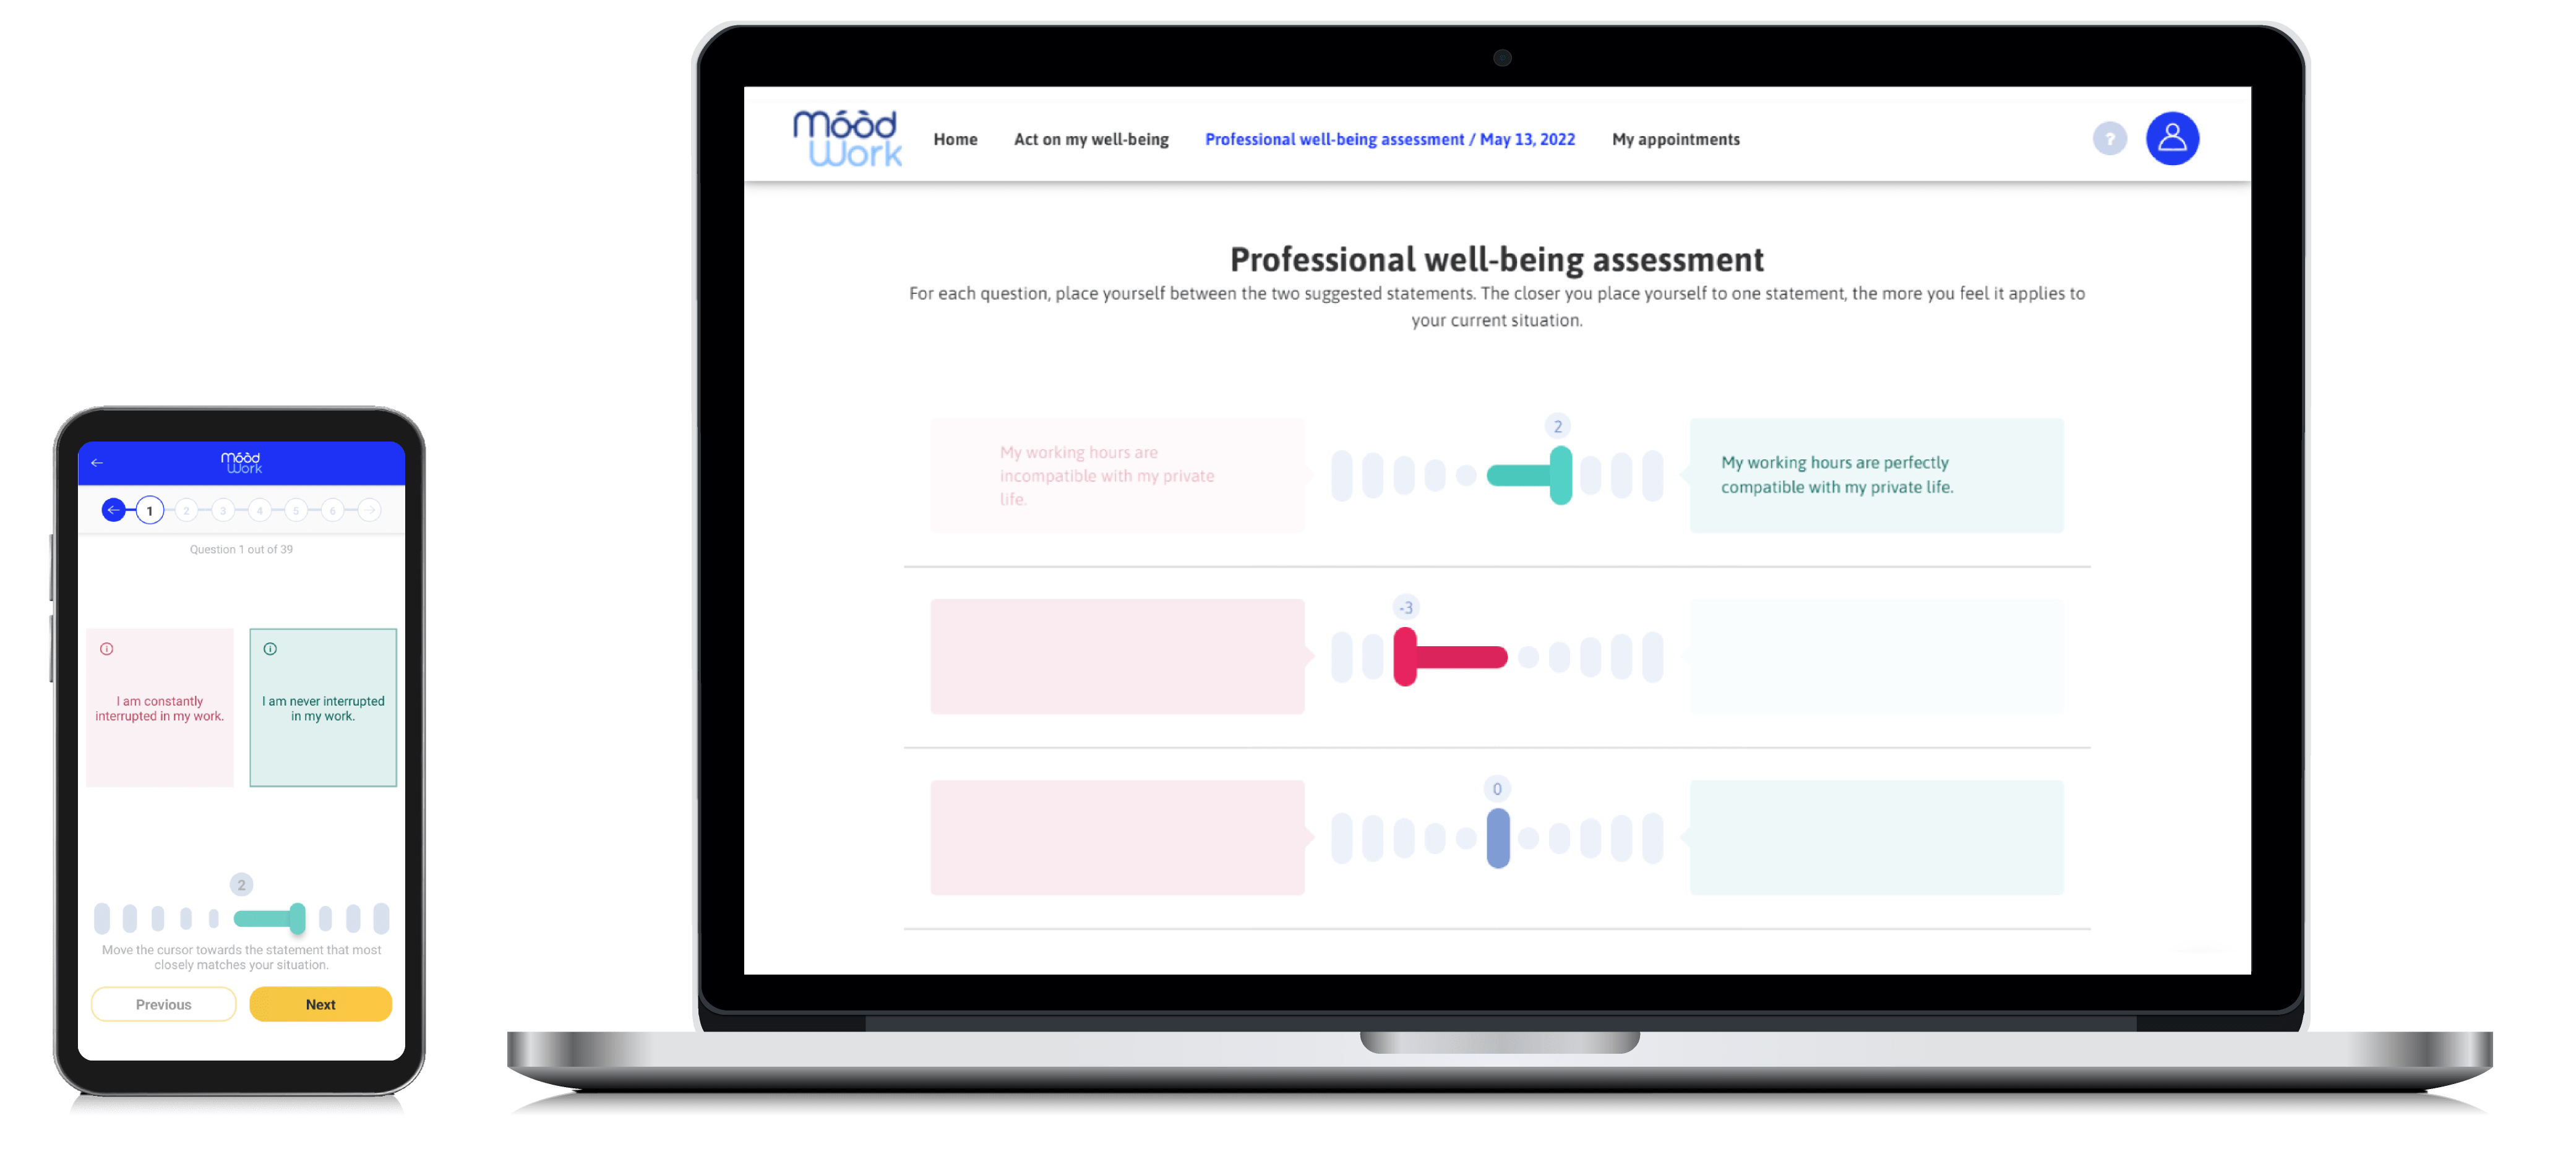 Wellness assessment on Moodwork, a software for improving well-being at work